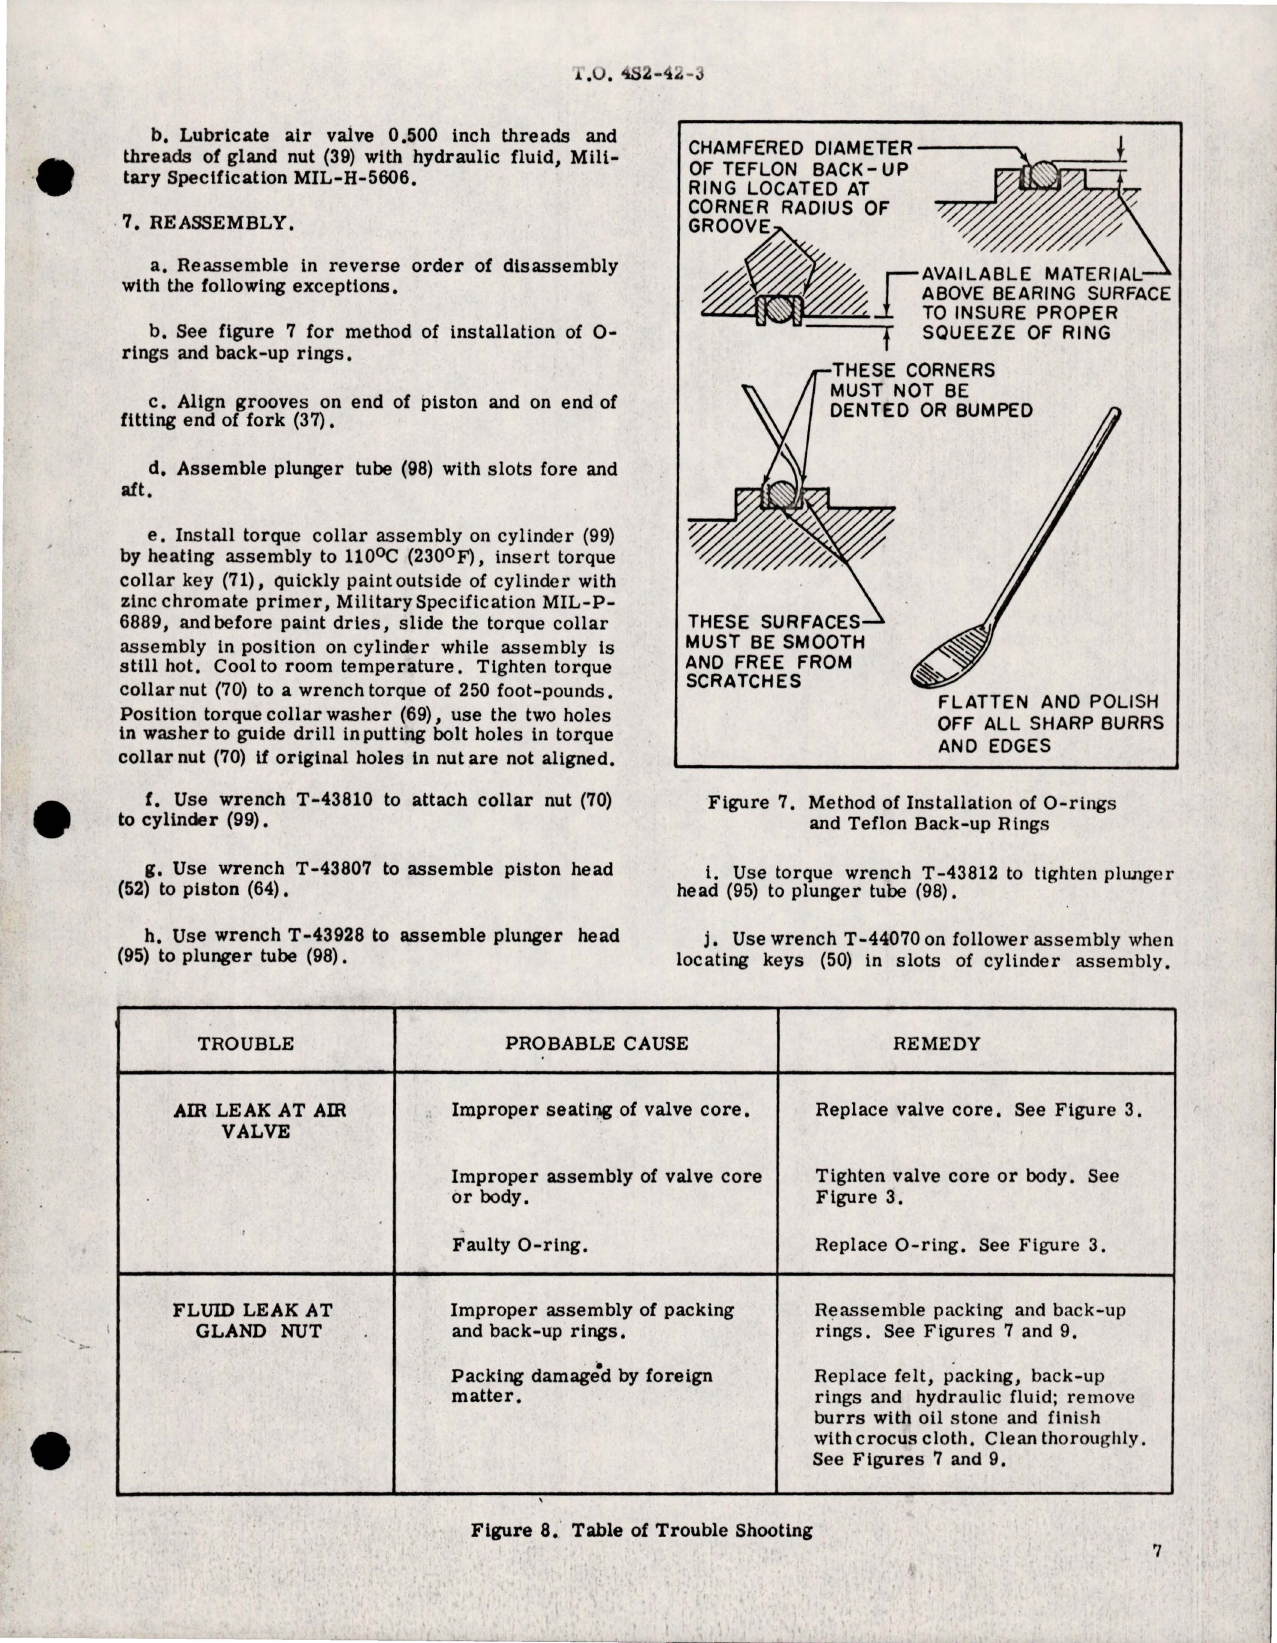 Sample page 7 from AirCorps Library document: Overhaul Instructions with Parts Breakdown for Nose Landing Gear Strut Assembly - Parts 8488B, 8488C, 8488D, 8488E, 8488G